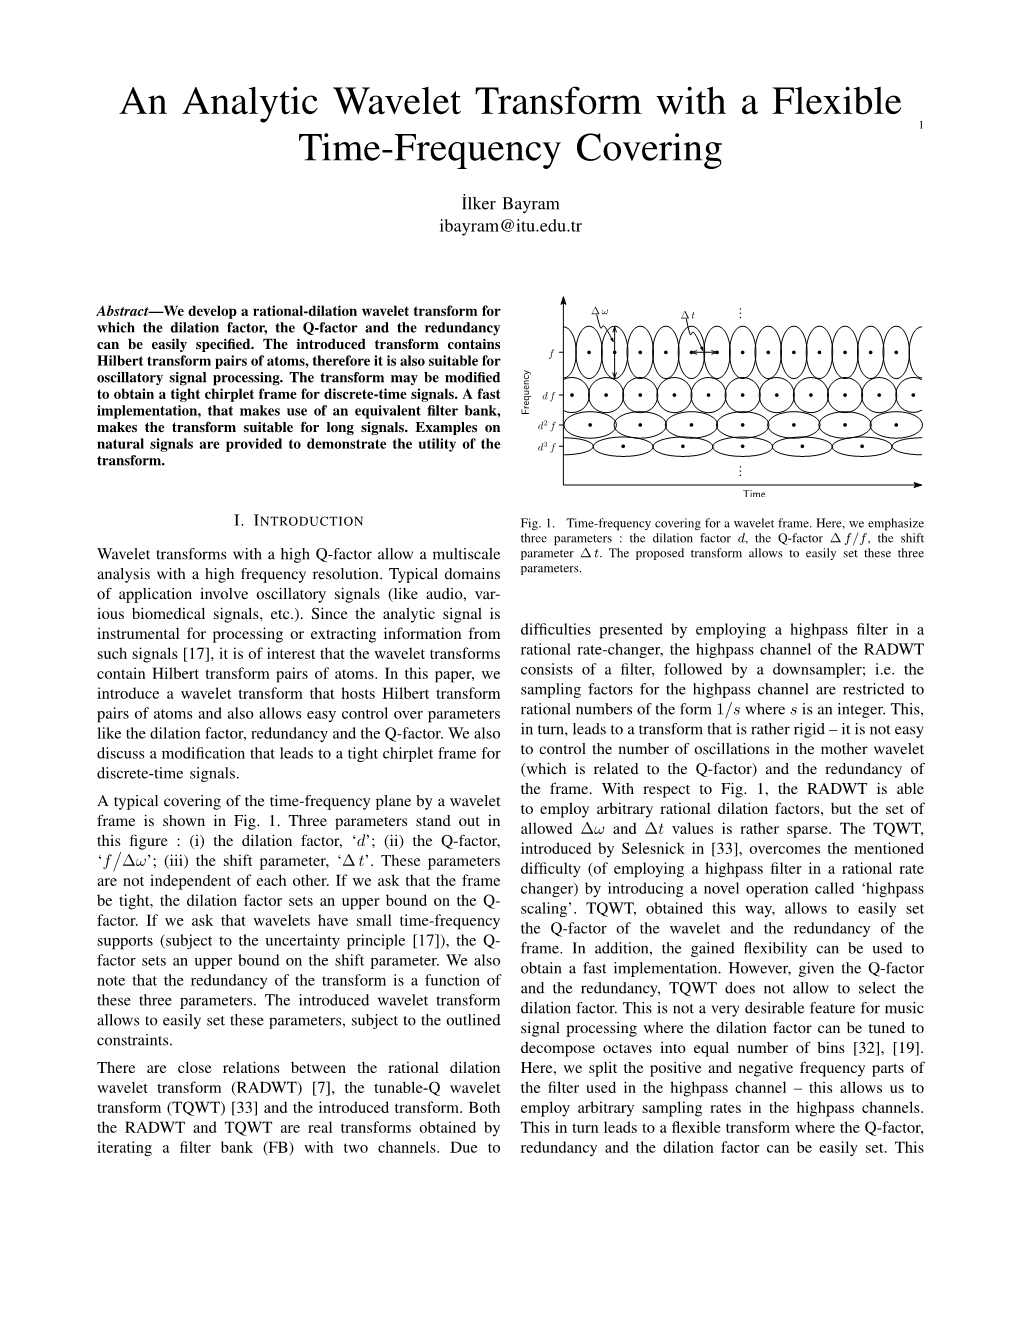 An Analytic Wavelet Transform with a Flexible Time-Frequency Covering